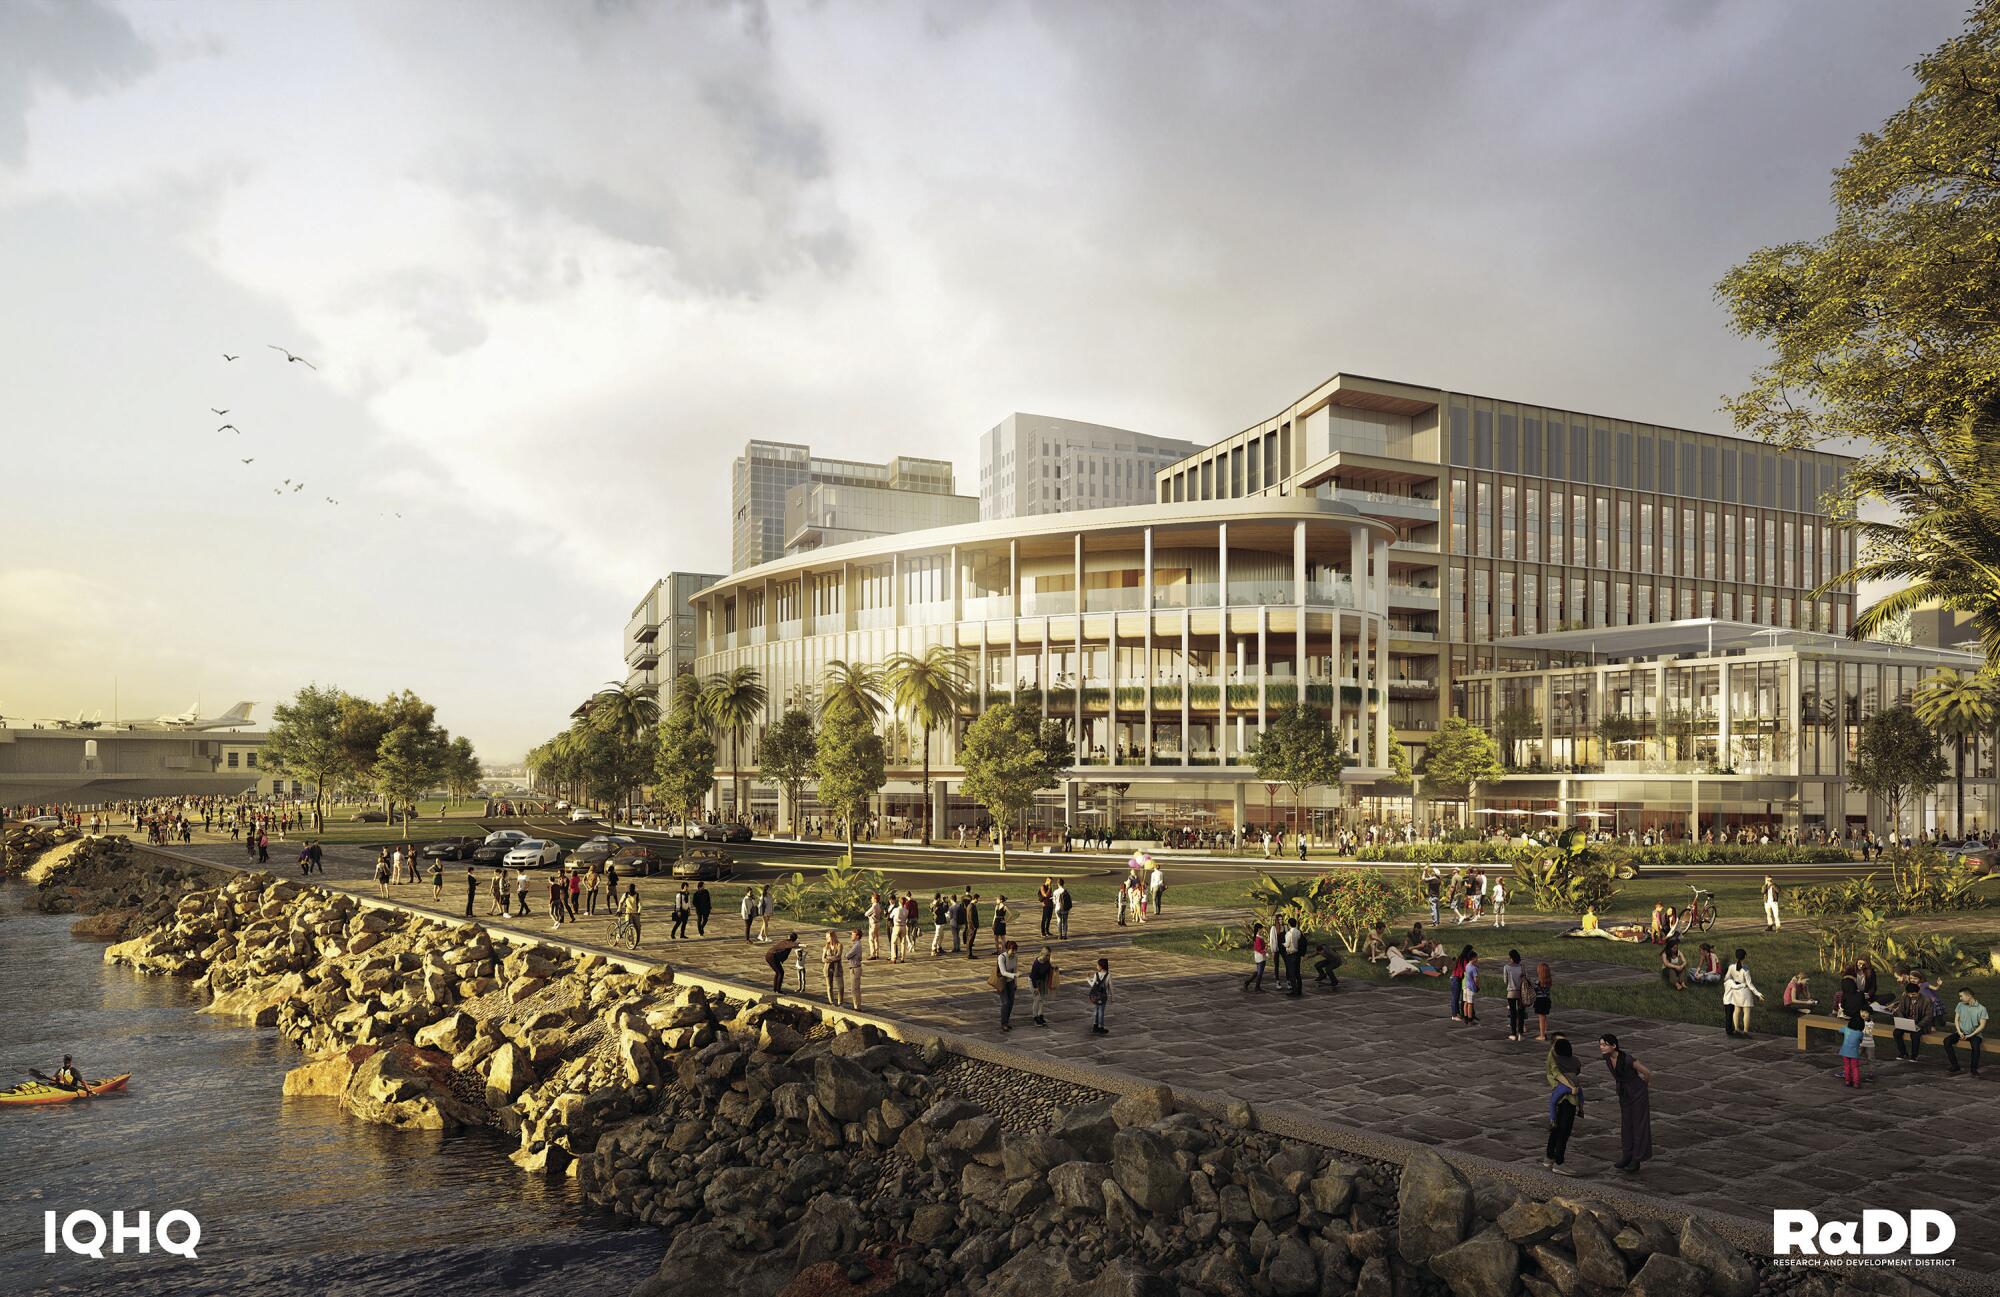 A rendering of the south west corner of IQHQ's Research and Development District